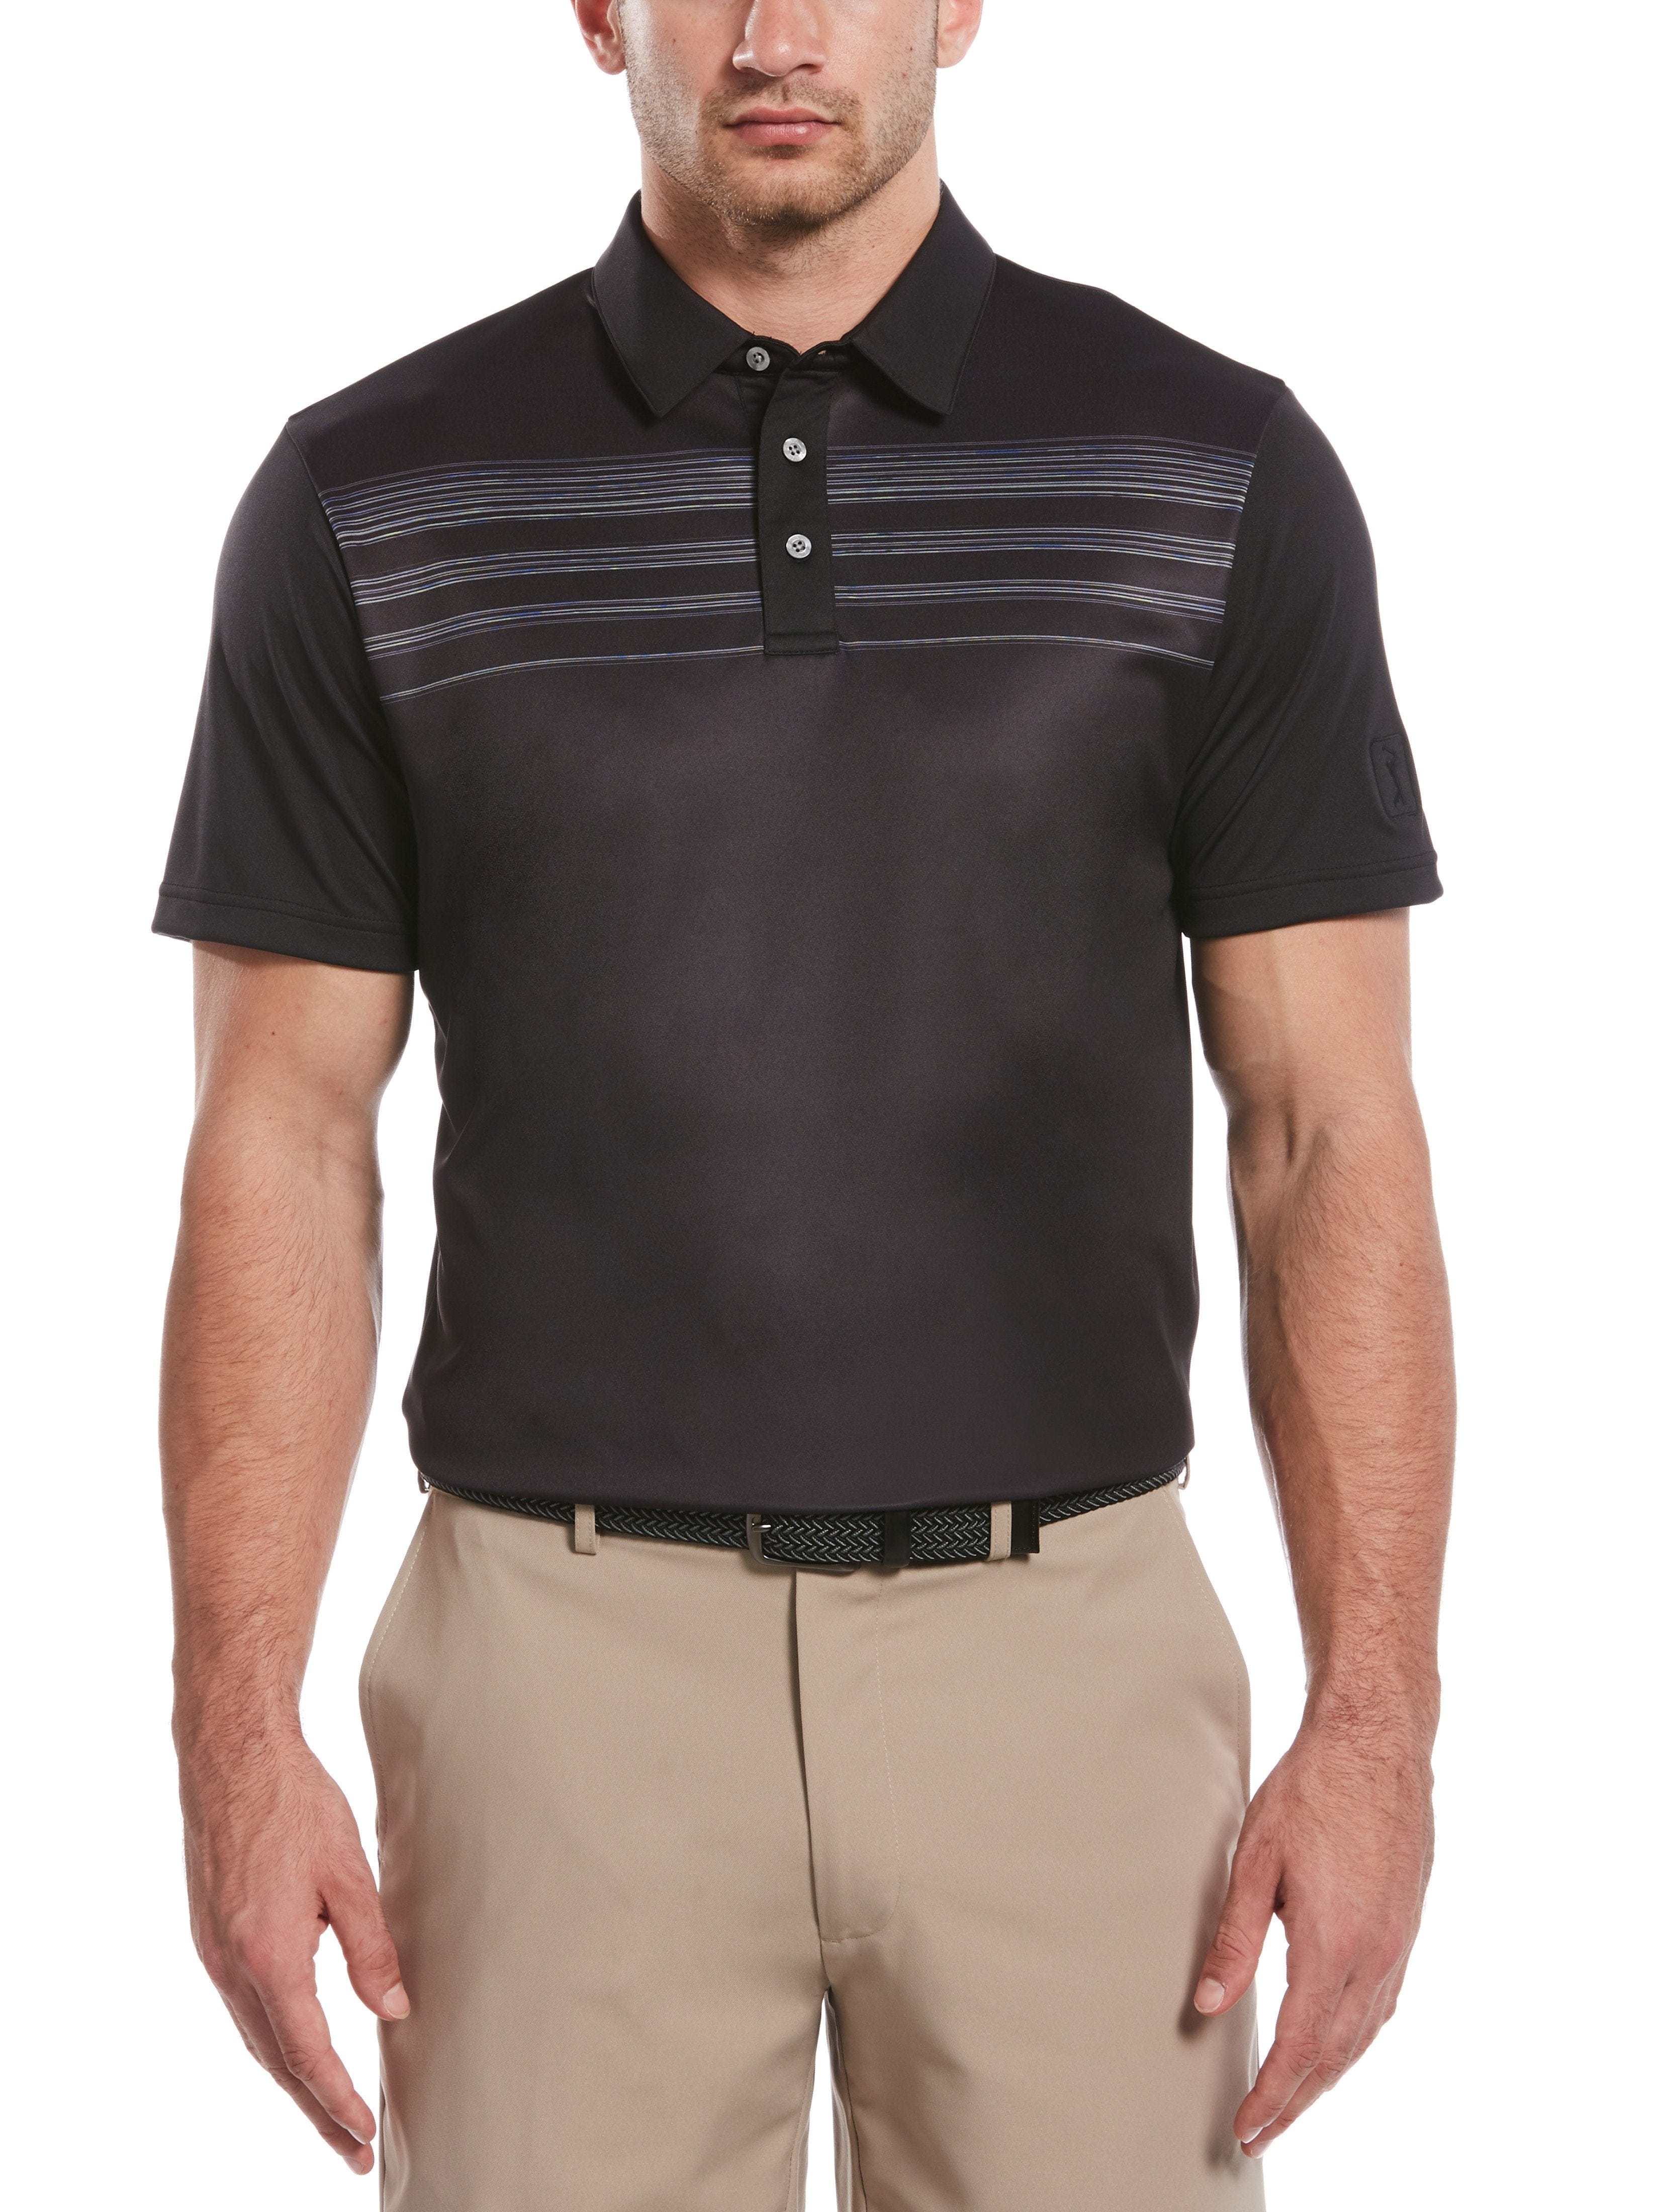 PGA TOUR Apparel Mens Space Dyed Chest Stripe Polo Shirt, Size Small, Black, 100% Polyester | Golf Apparel Shop